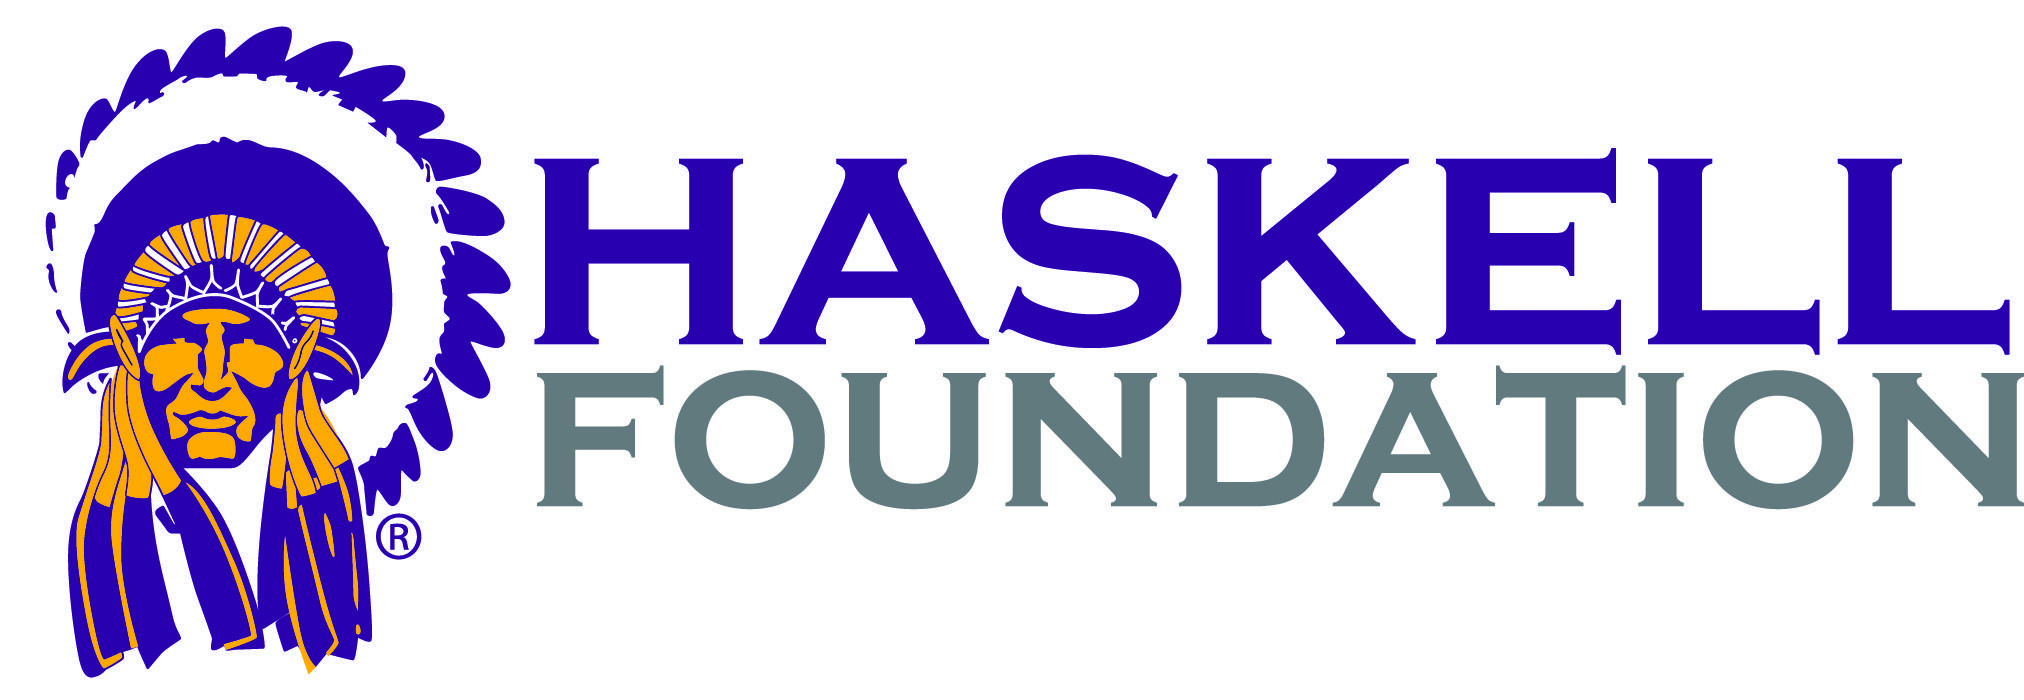 Haskell Logo - haskell logo - Missouri Meetings and Events